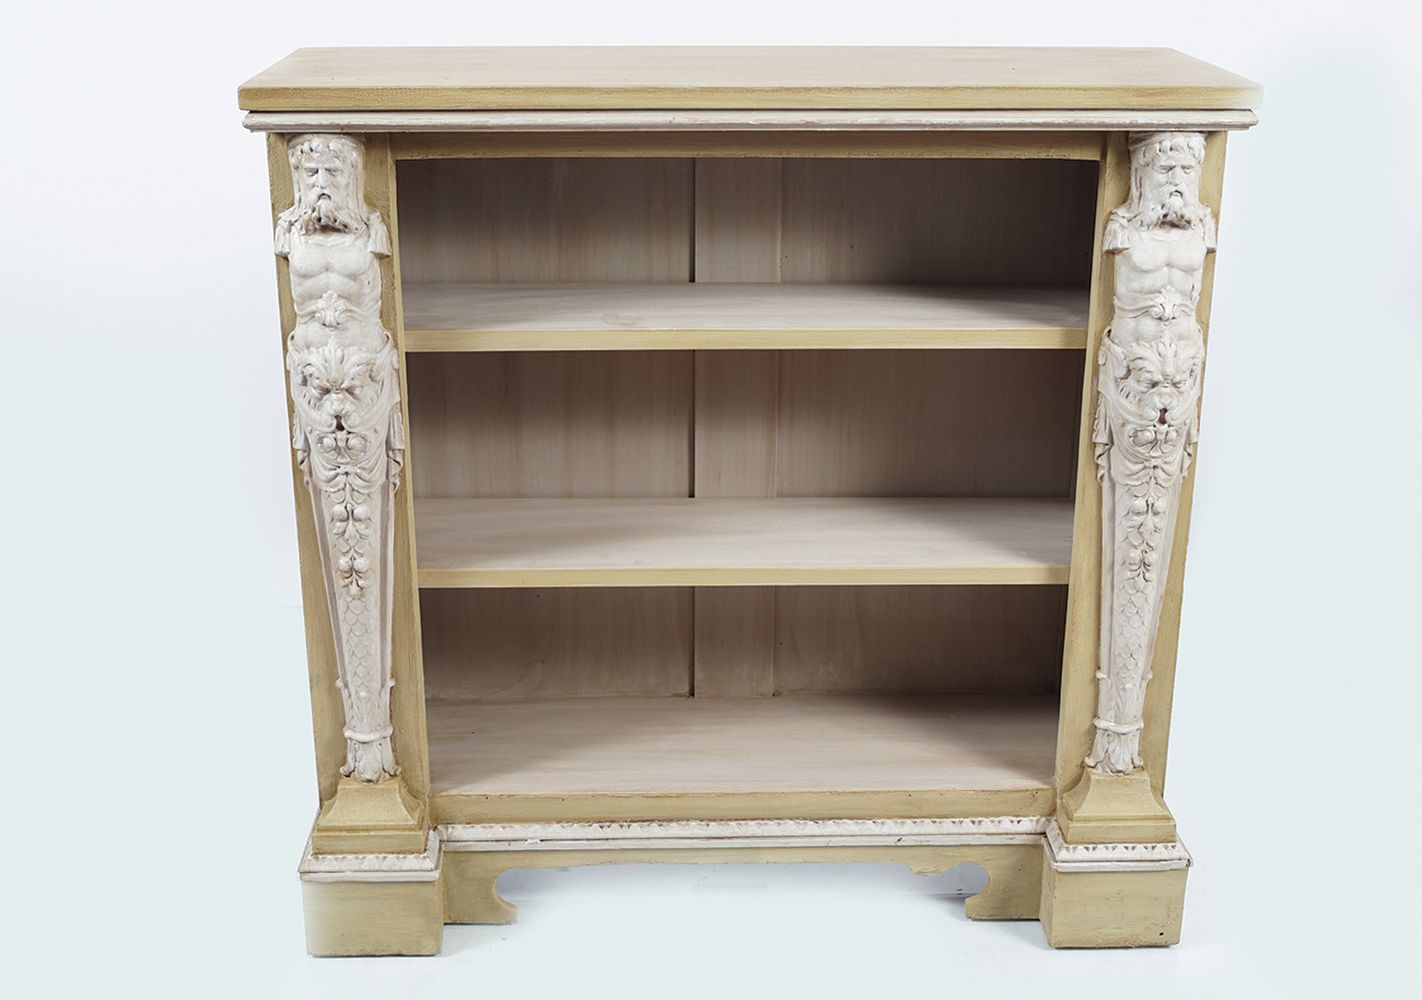 PAIR 19TH-CENTURY CARVED OPEN BOOKCASES